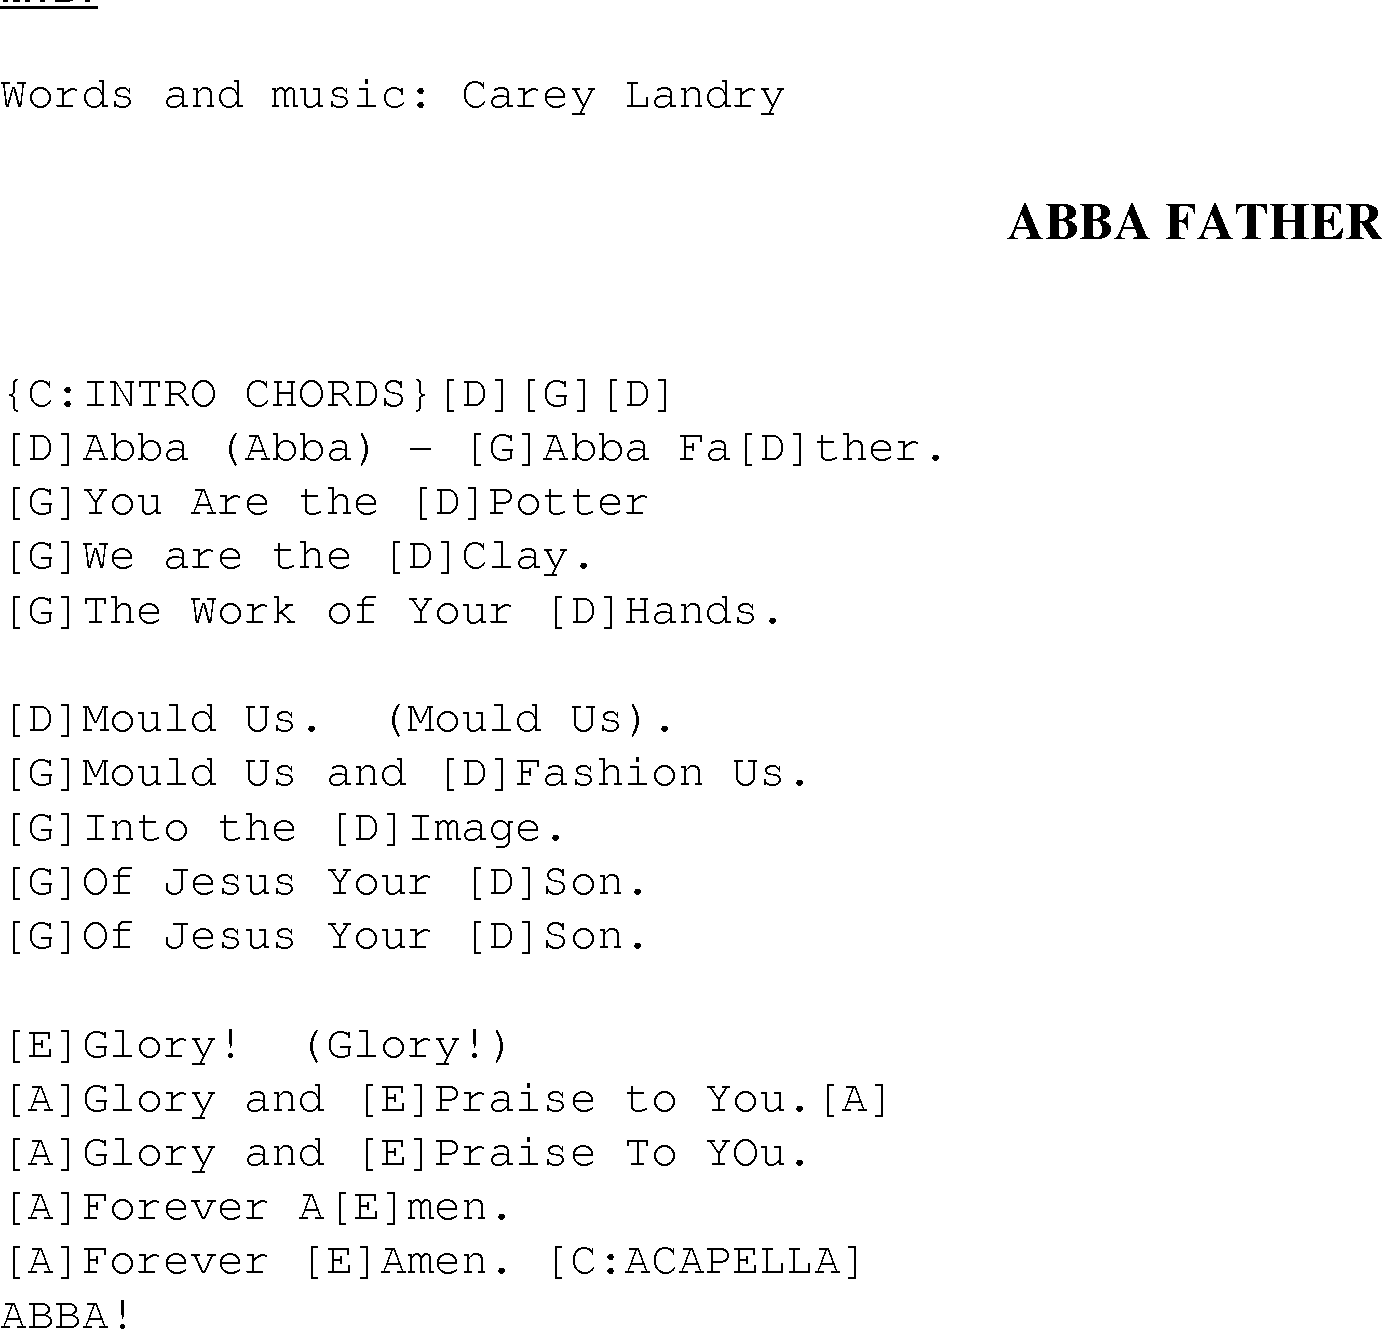 Gospel Song: abba_father, lyrics and chords.